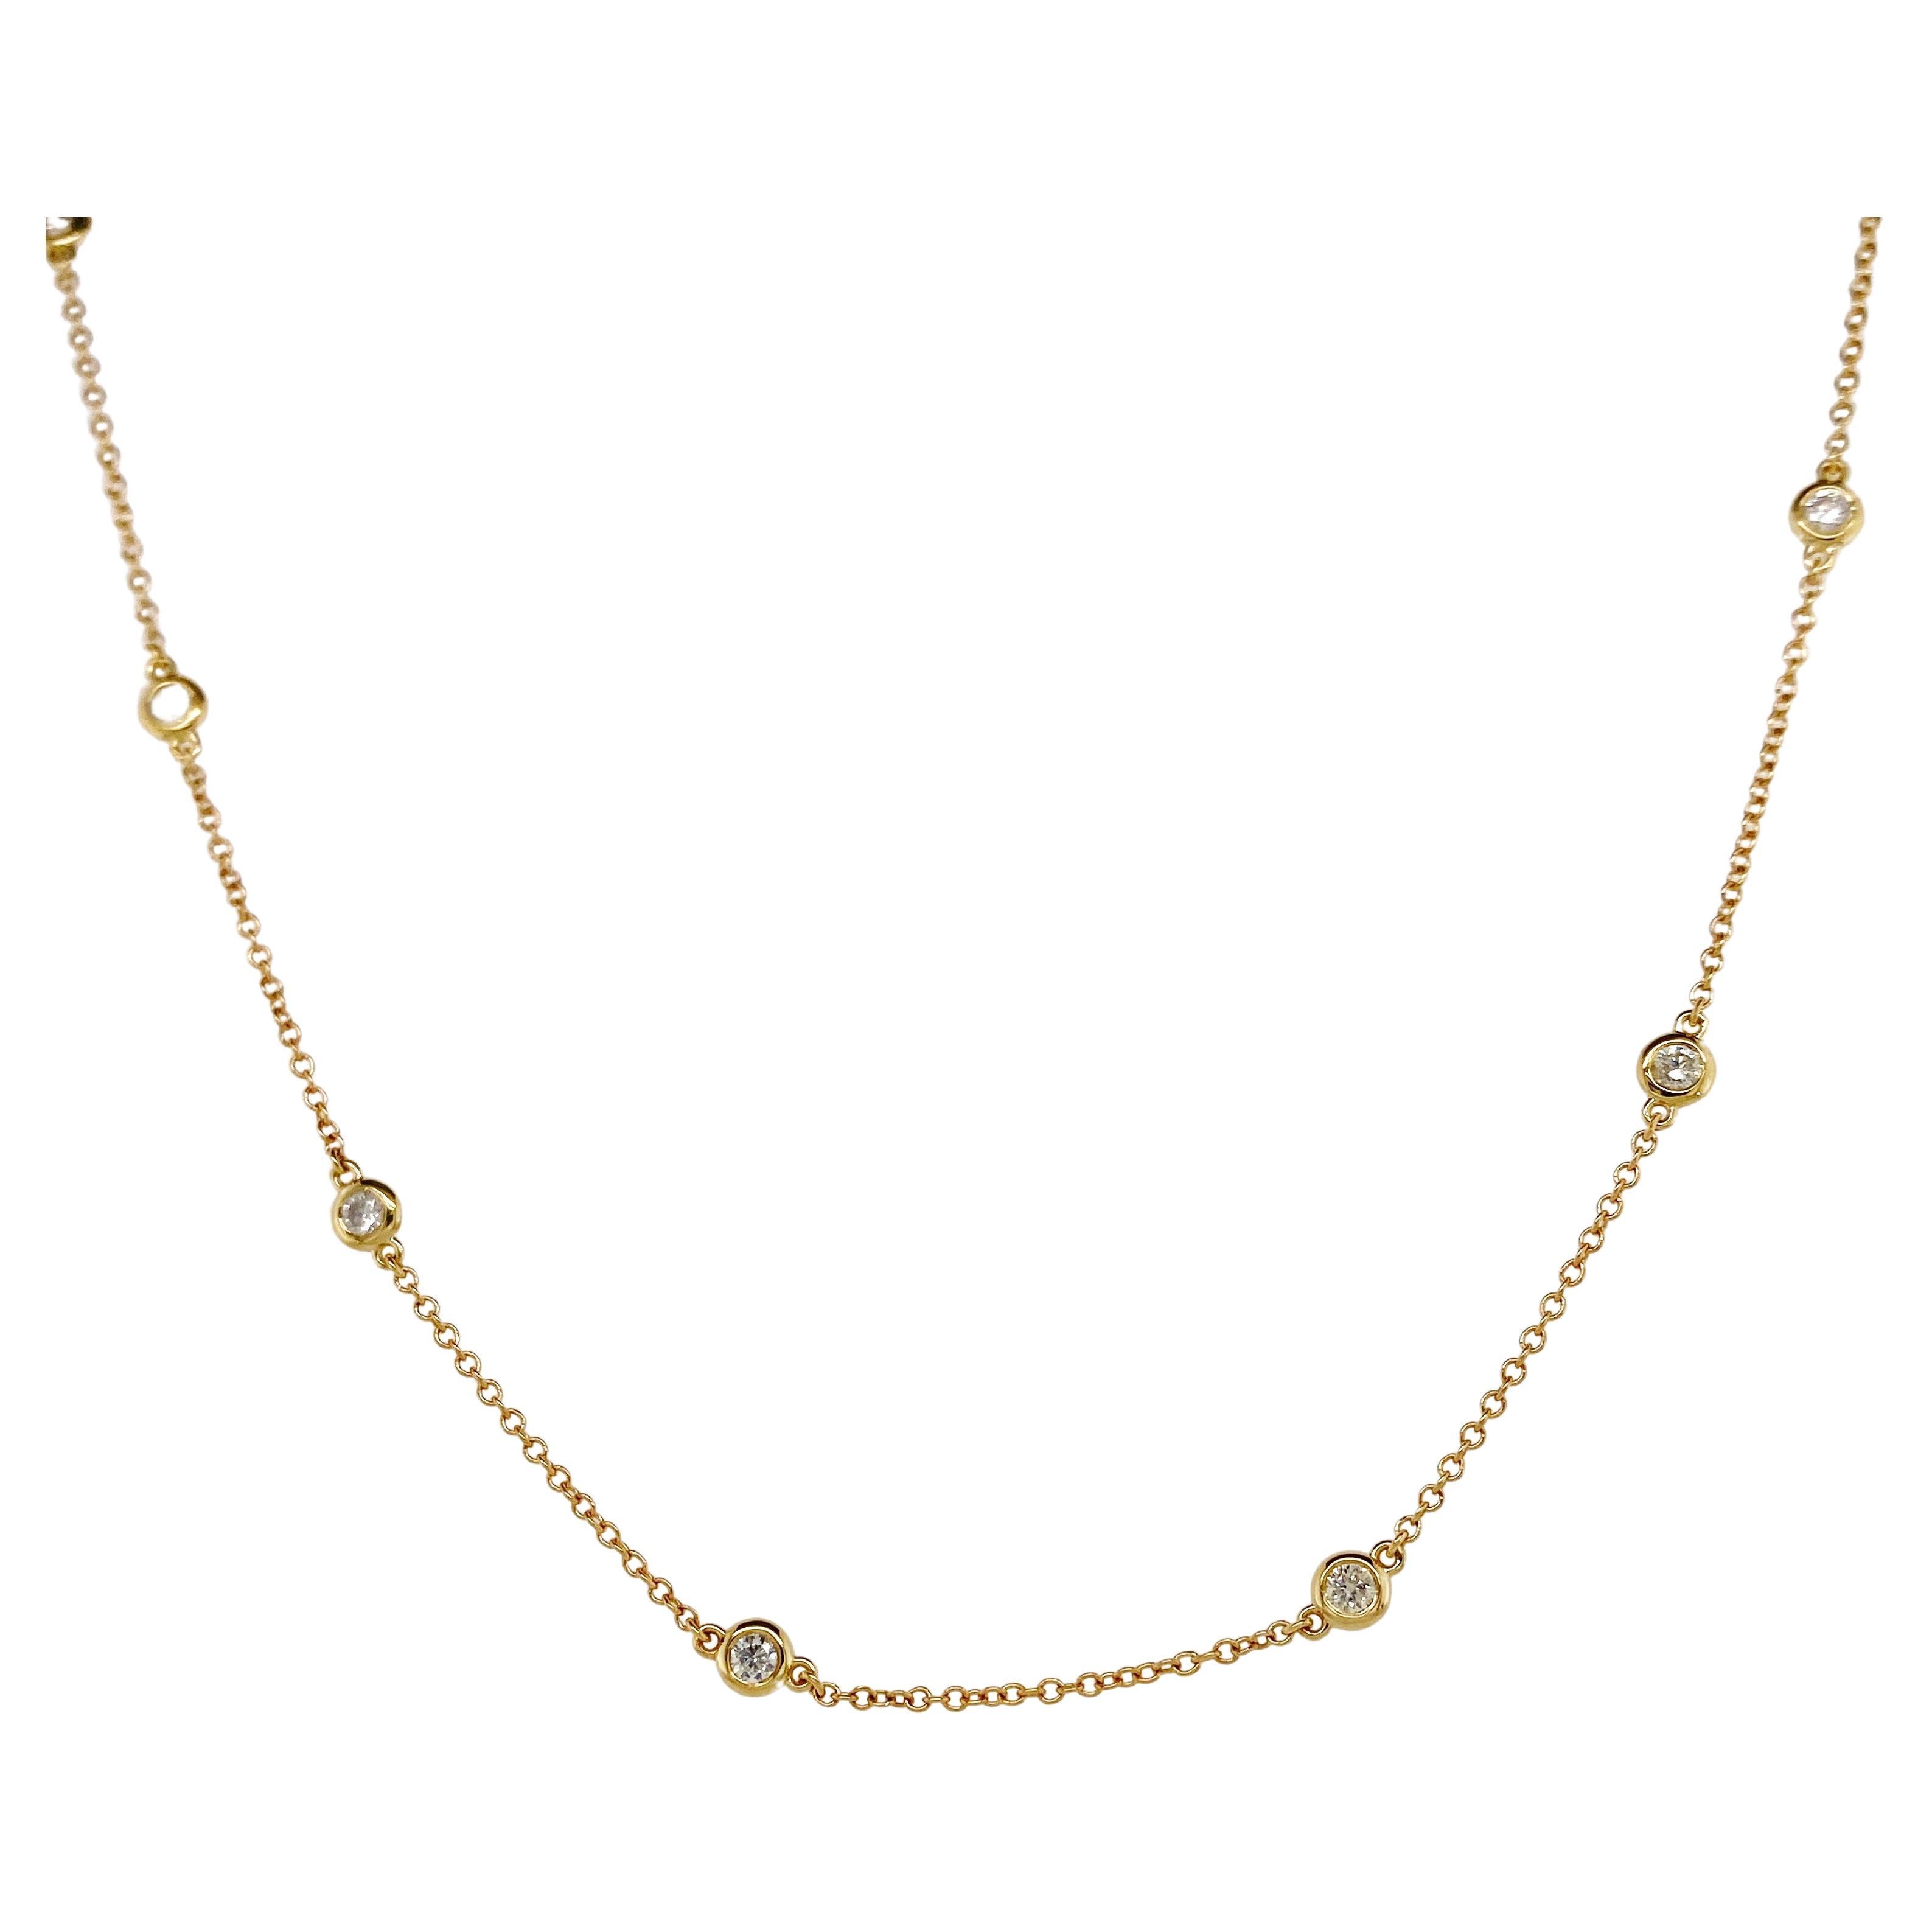 Eight Diamonds Necklace Diamonds by the Yard Necklace in 14K Yellow Gold